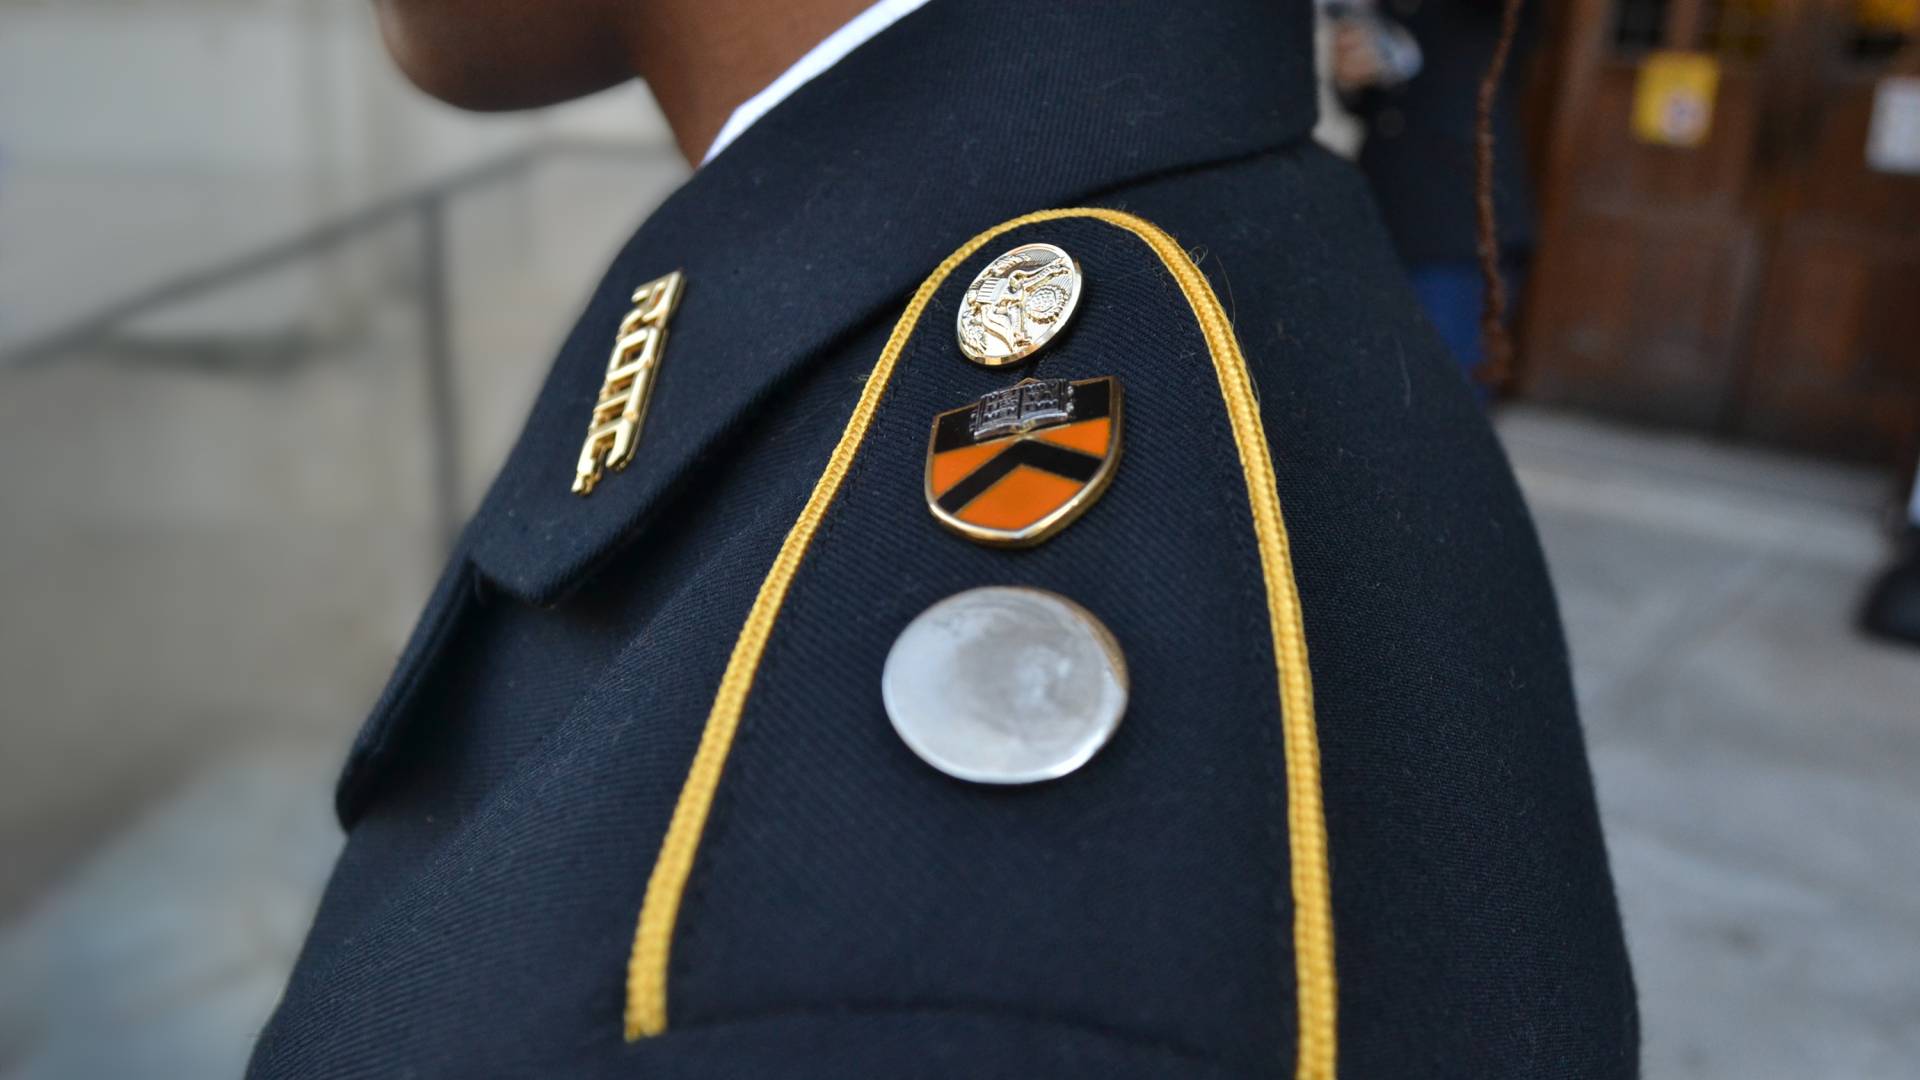 The insignia on the shoulders of a student